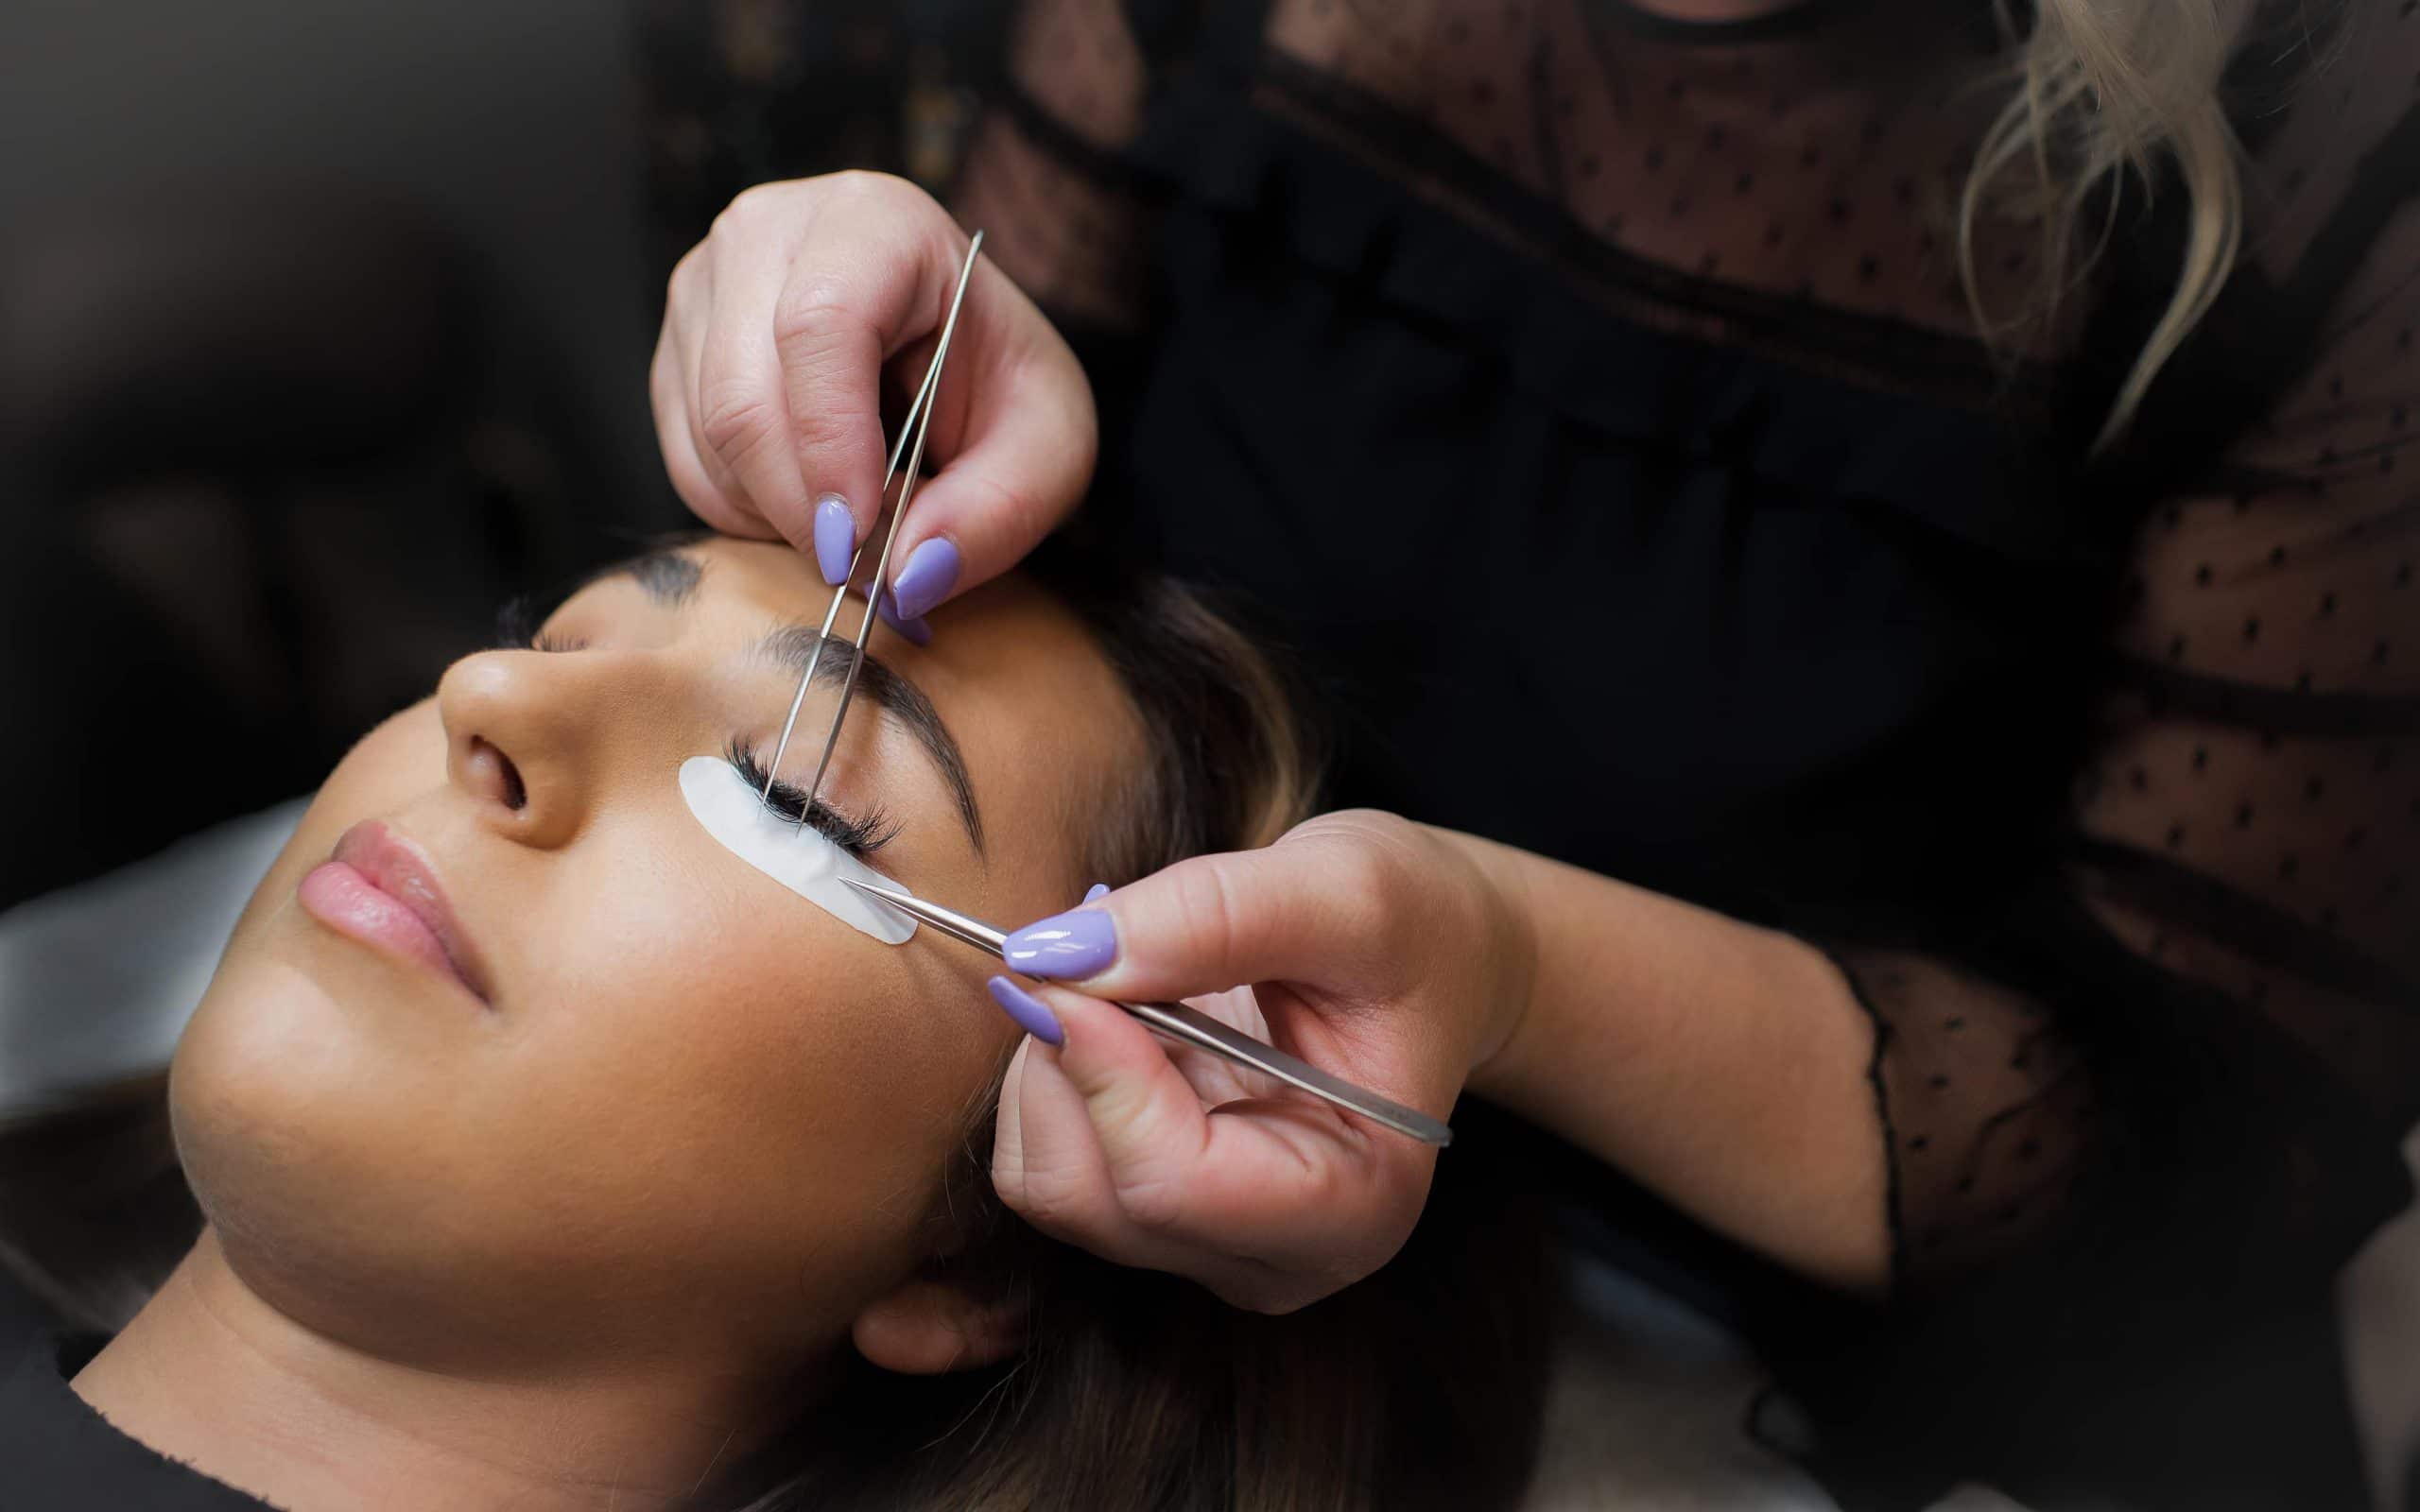 Learn why Lash Out's Eyelash Extension Training could be the right choice